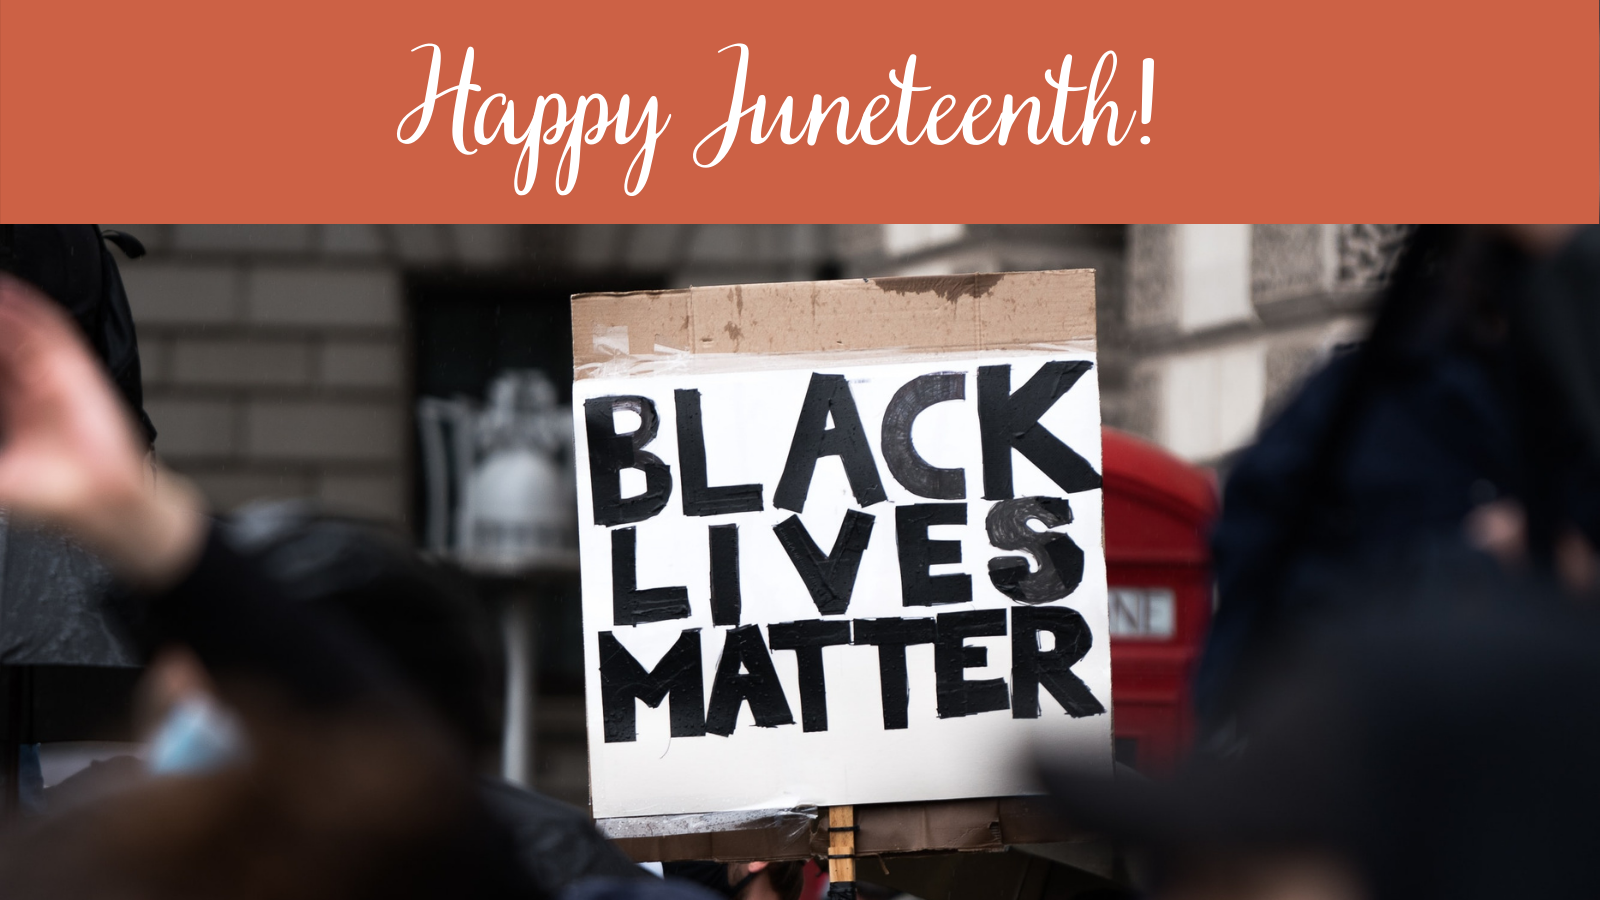 The words "Happy Juneteenth!" and a Black Lives Matter sign